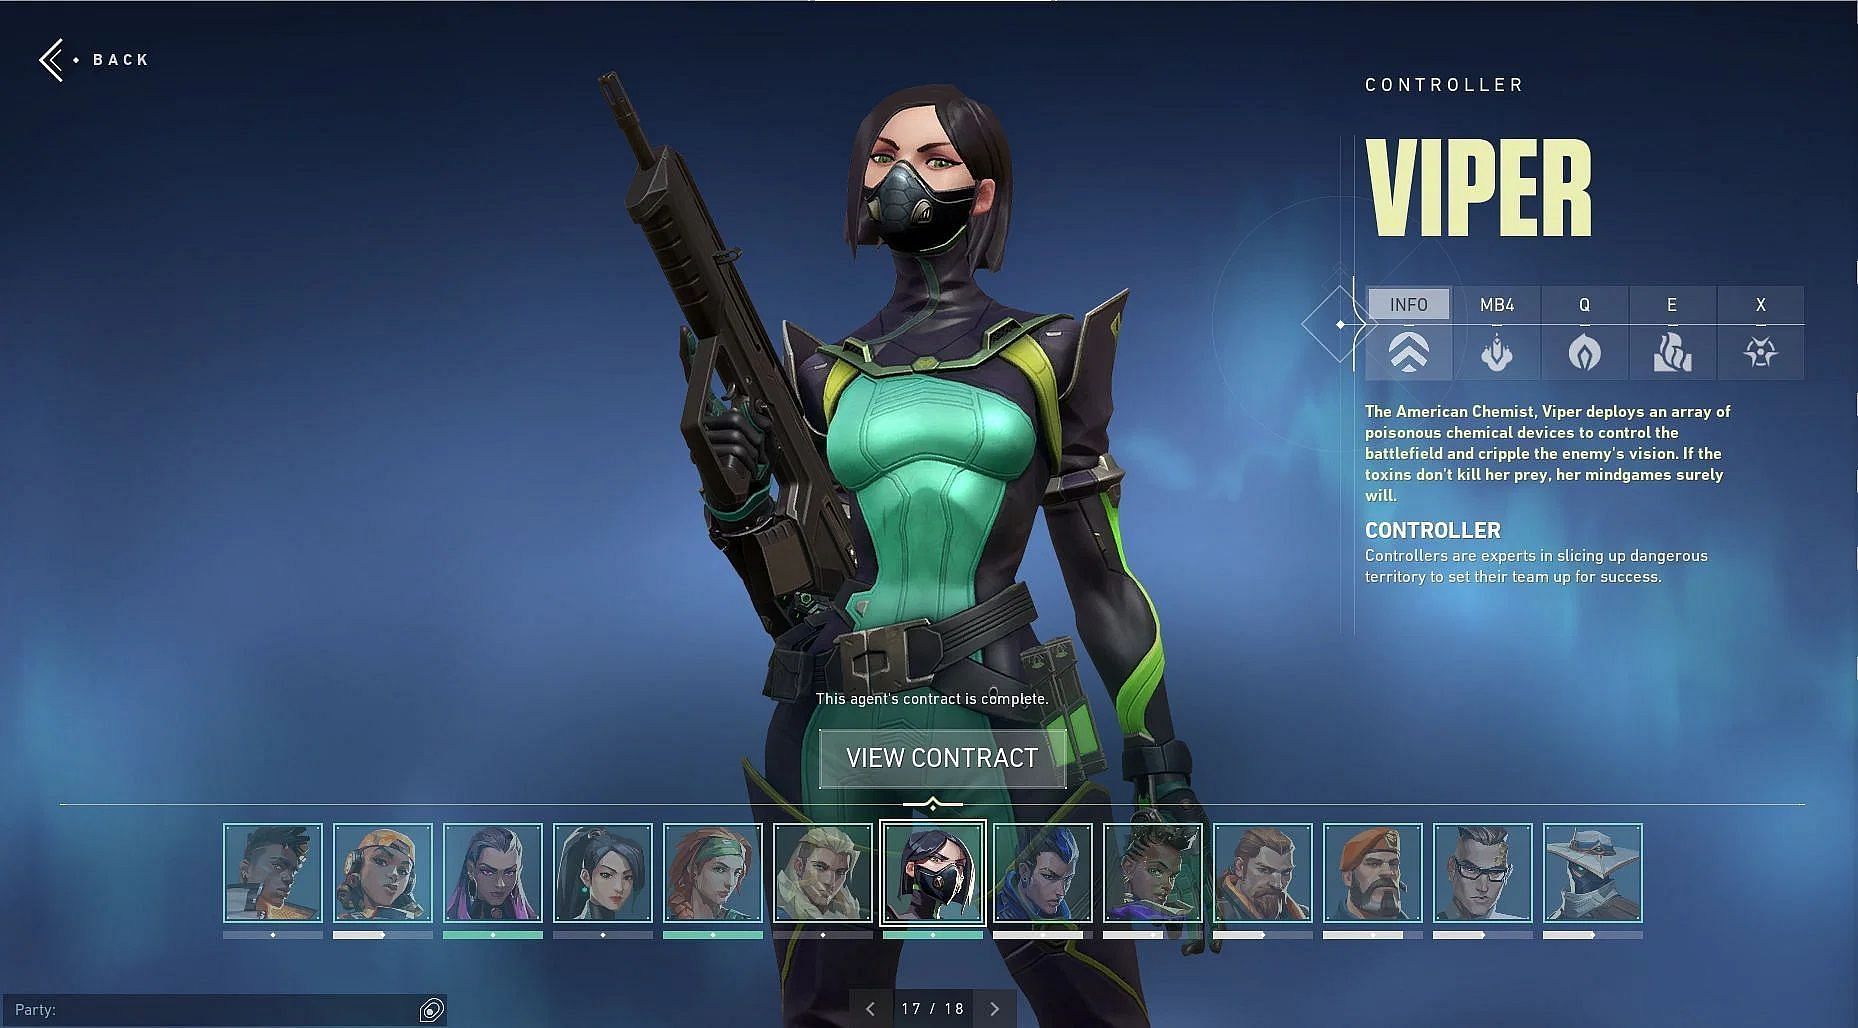 Viper is a Controller in Valorant (Image via Riot Games)